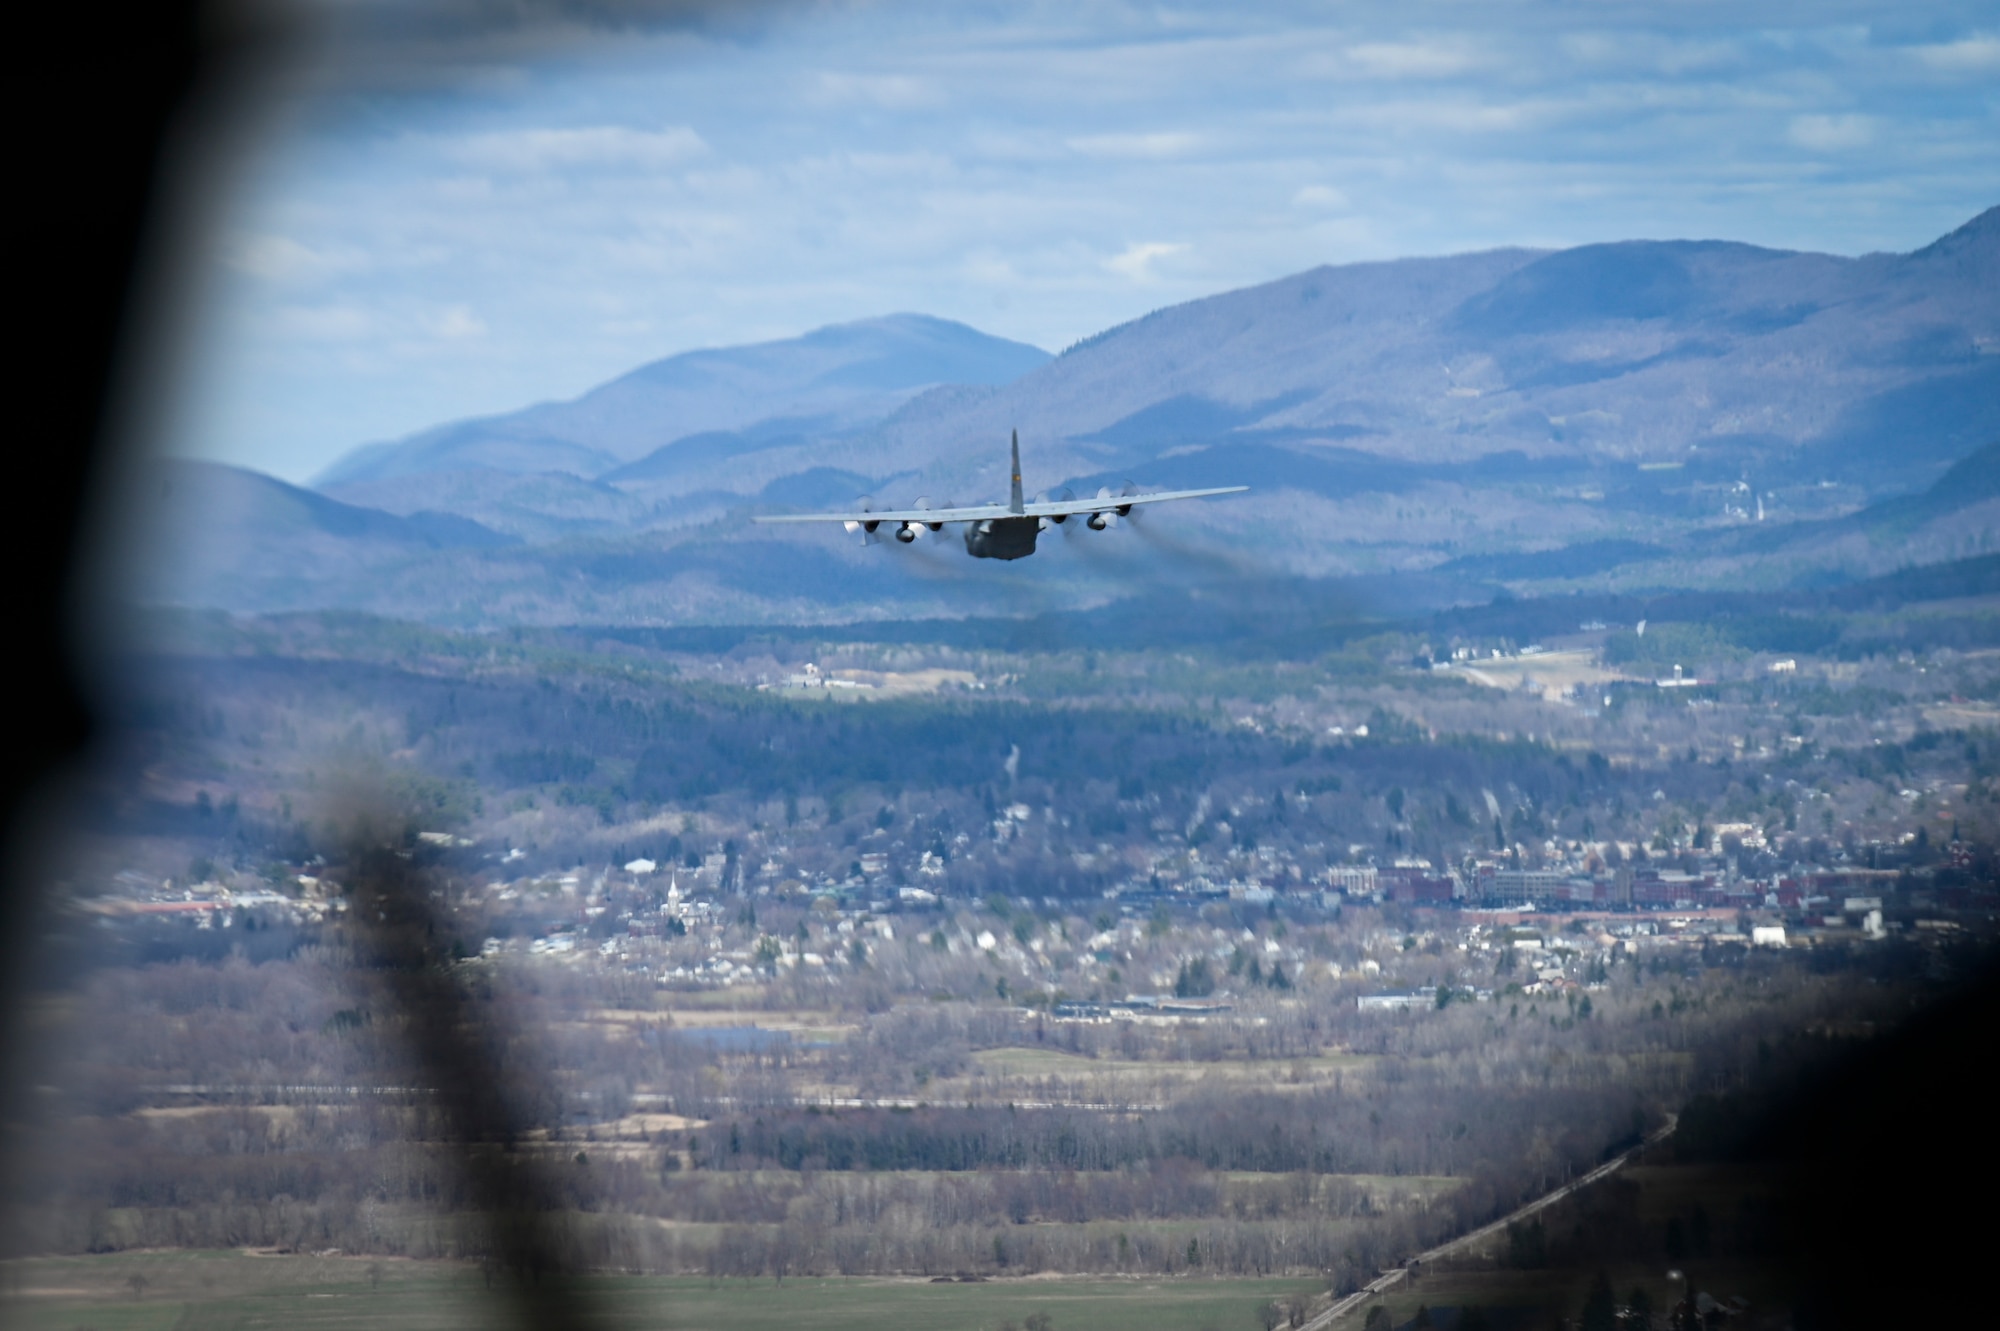 A C-130H Hercules from the 103rd Airlift Wing flies as part of a two-ship formation during a training mission over New England, April 7, 2021. during a training mission over New England, April 7, 2021. The 103rd Airlift Wing routinely flies local training missions to sharpen key tactical airlift capabilities. (U.S. Air National Guard photo by Tech. Sgt. Steven Tucker)